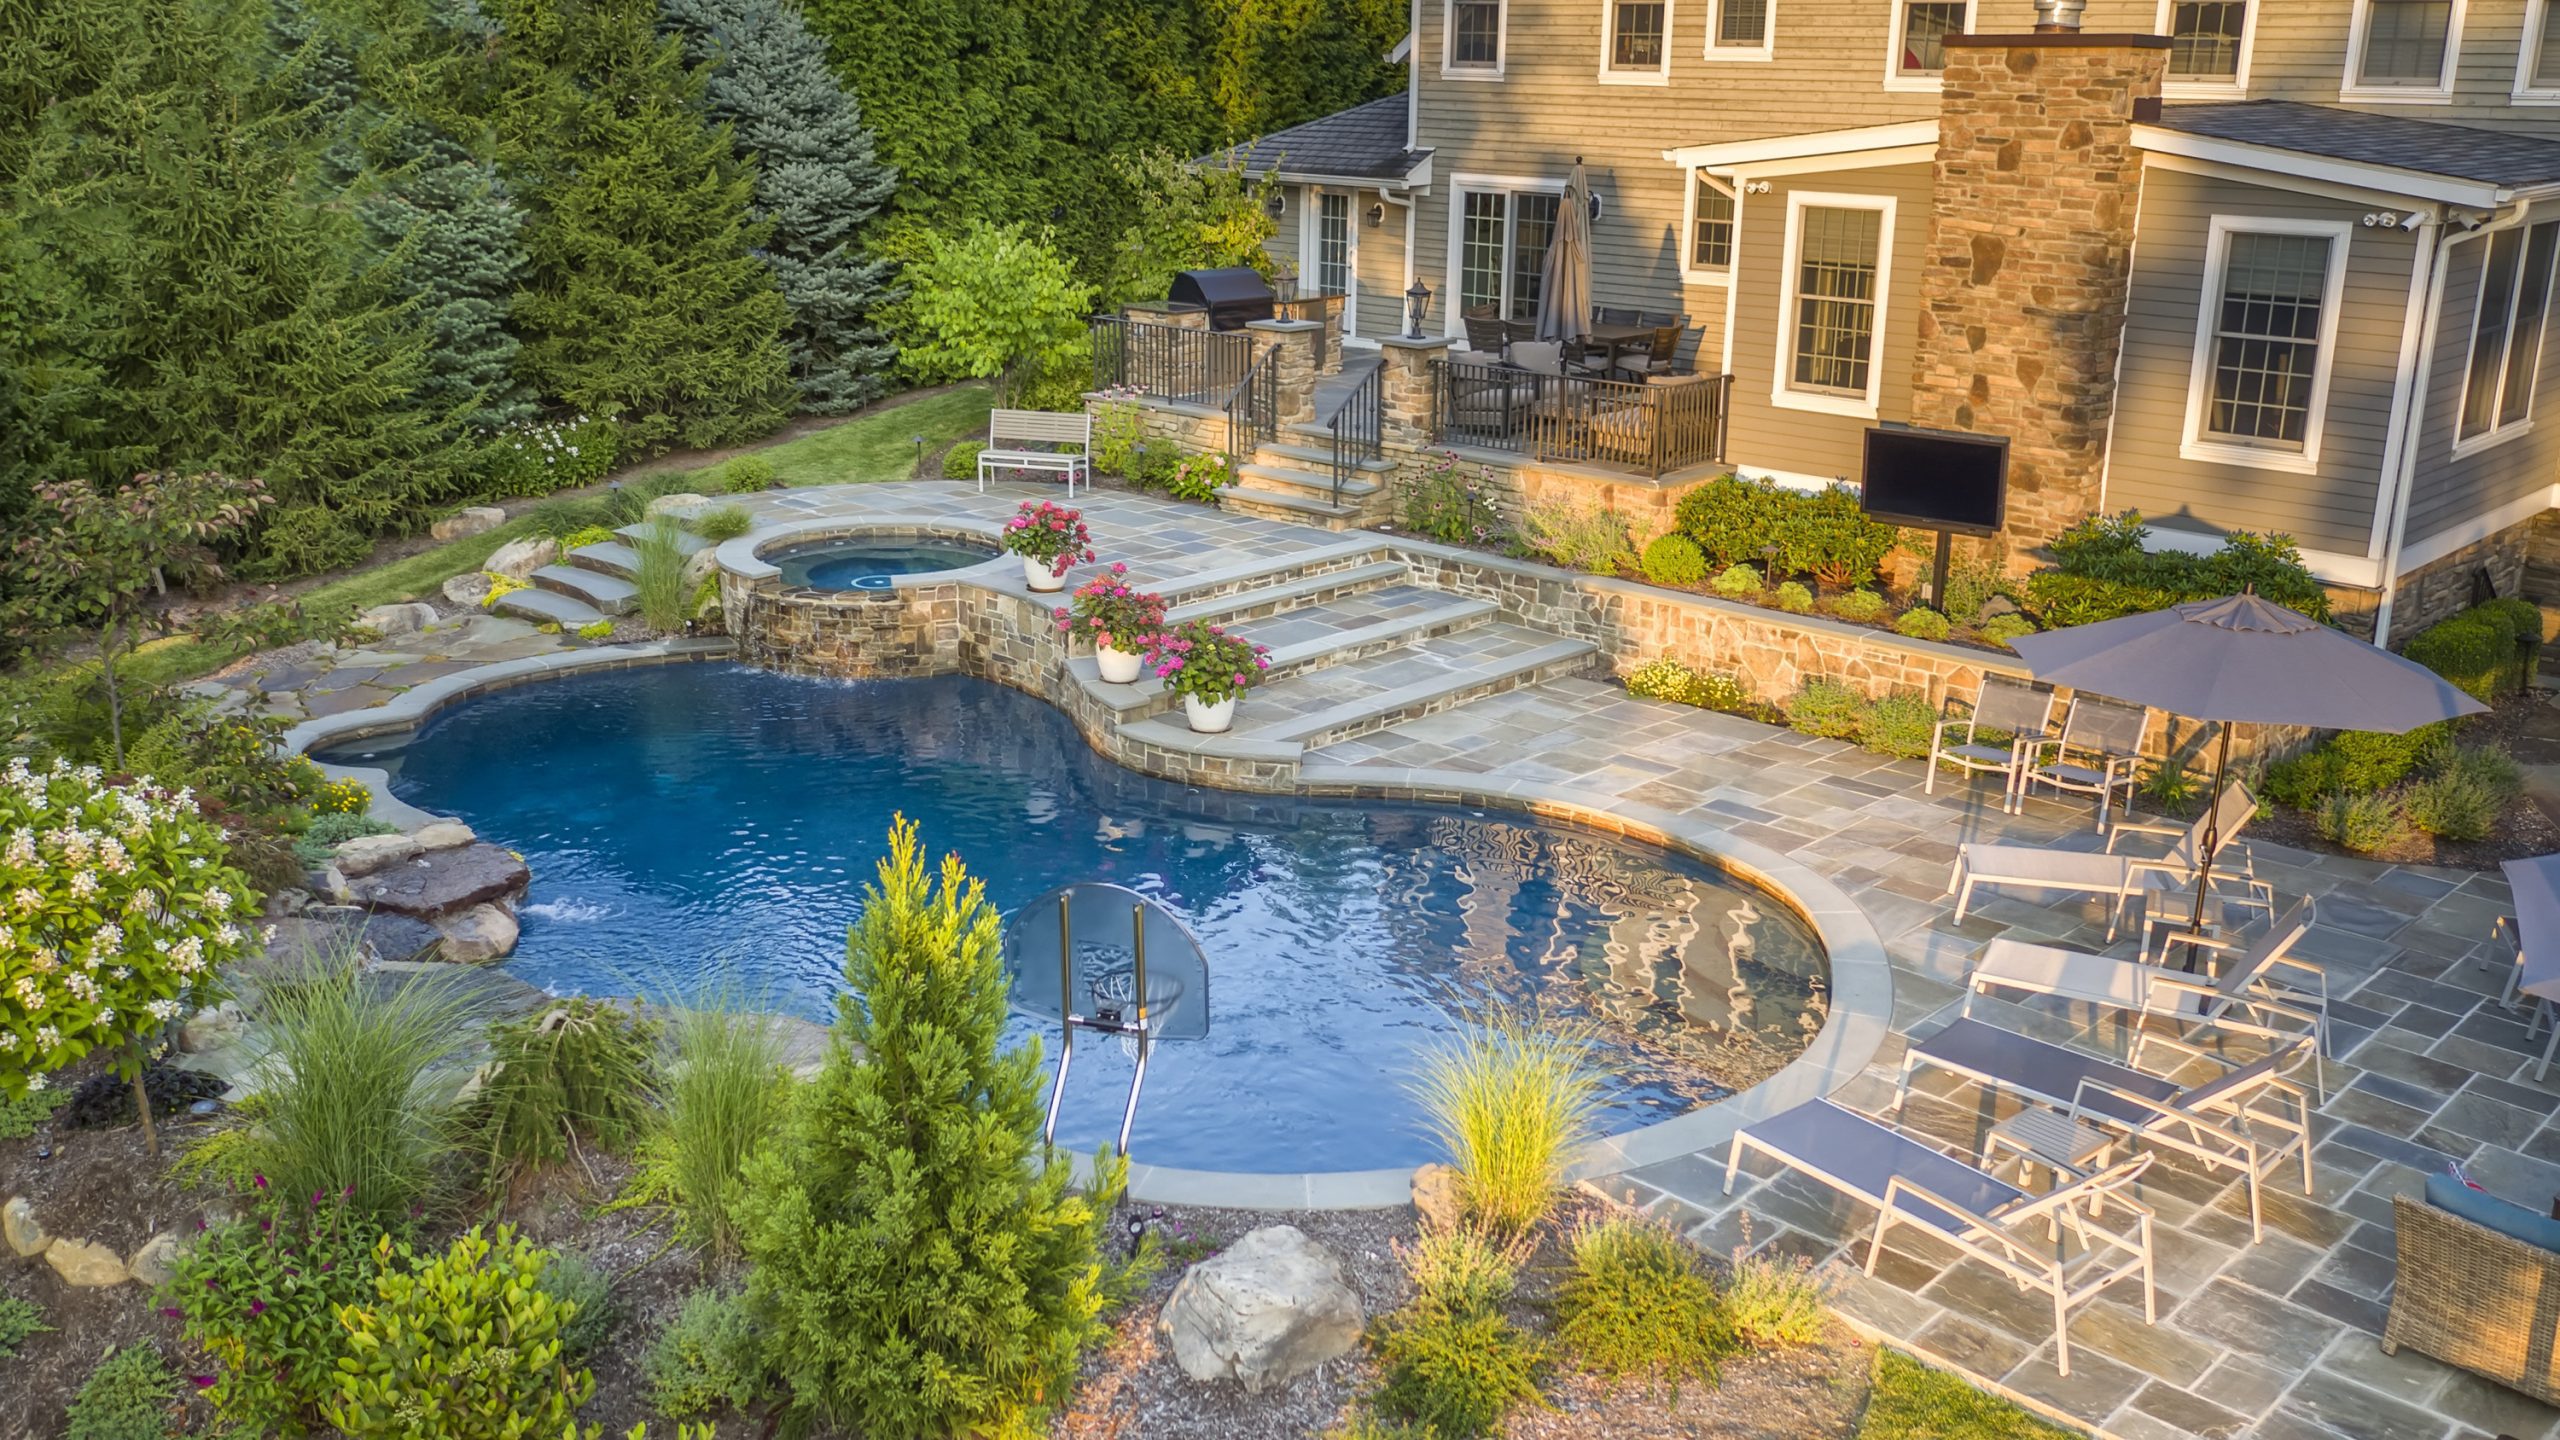 Landscaping & Pool Concepts